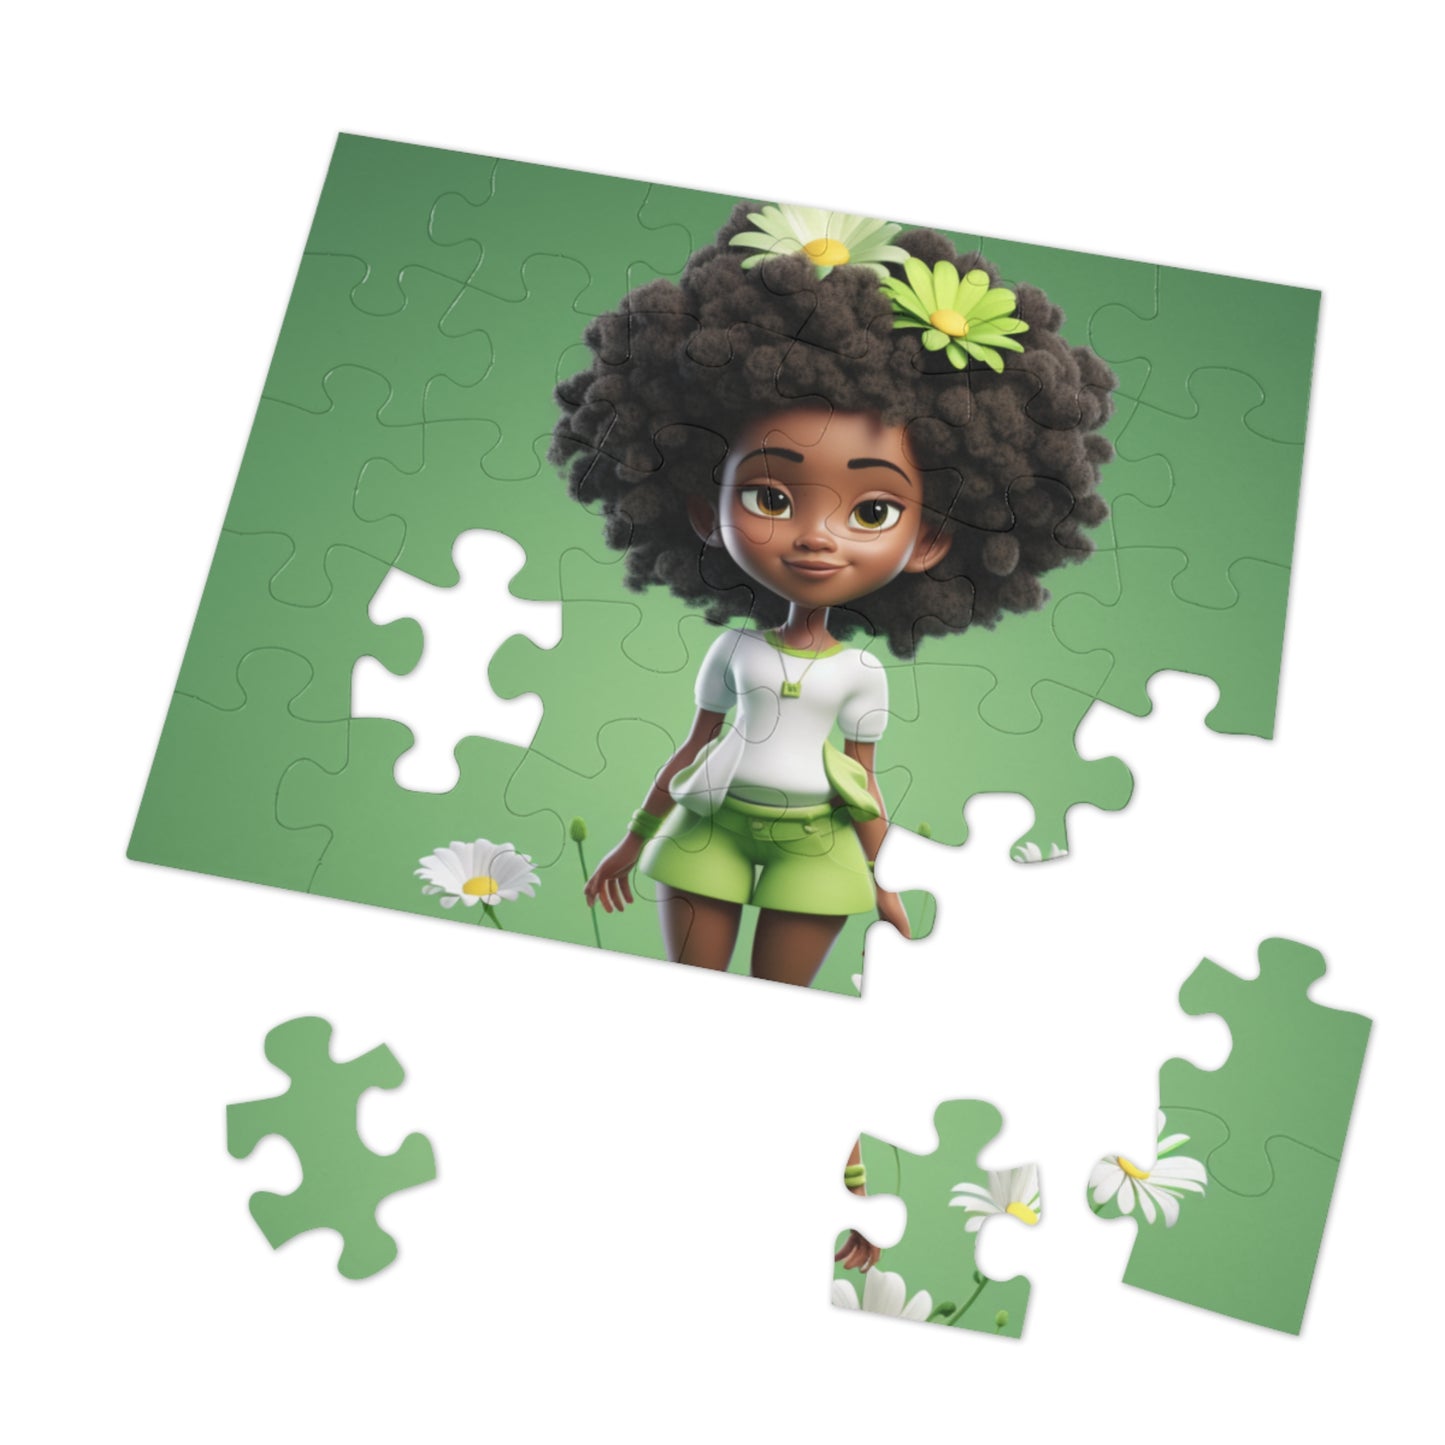 Beautiful Black Fairy (Green) Jigsaw Puzzle - 30 Pieces